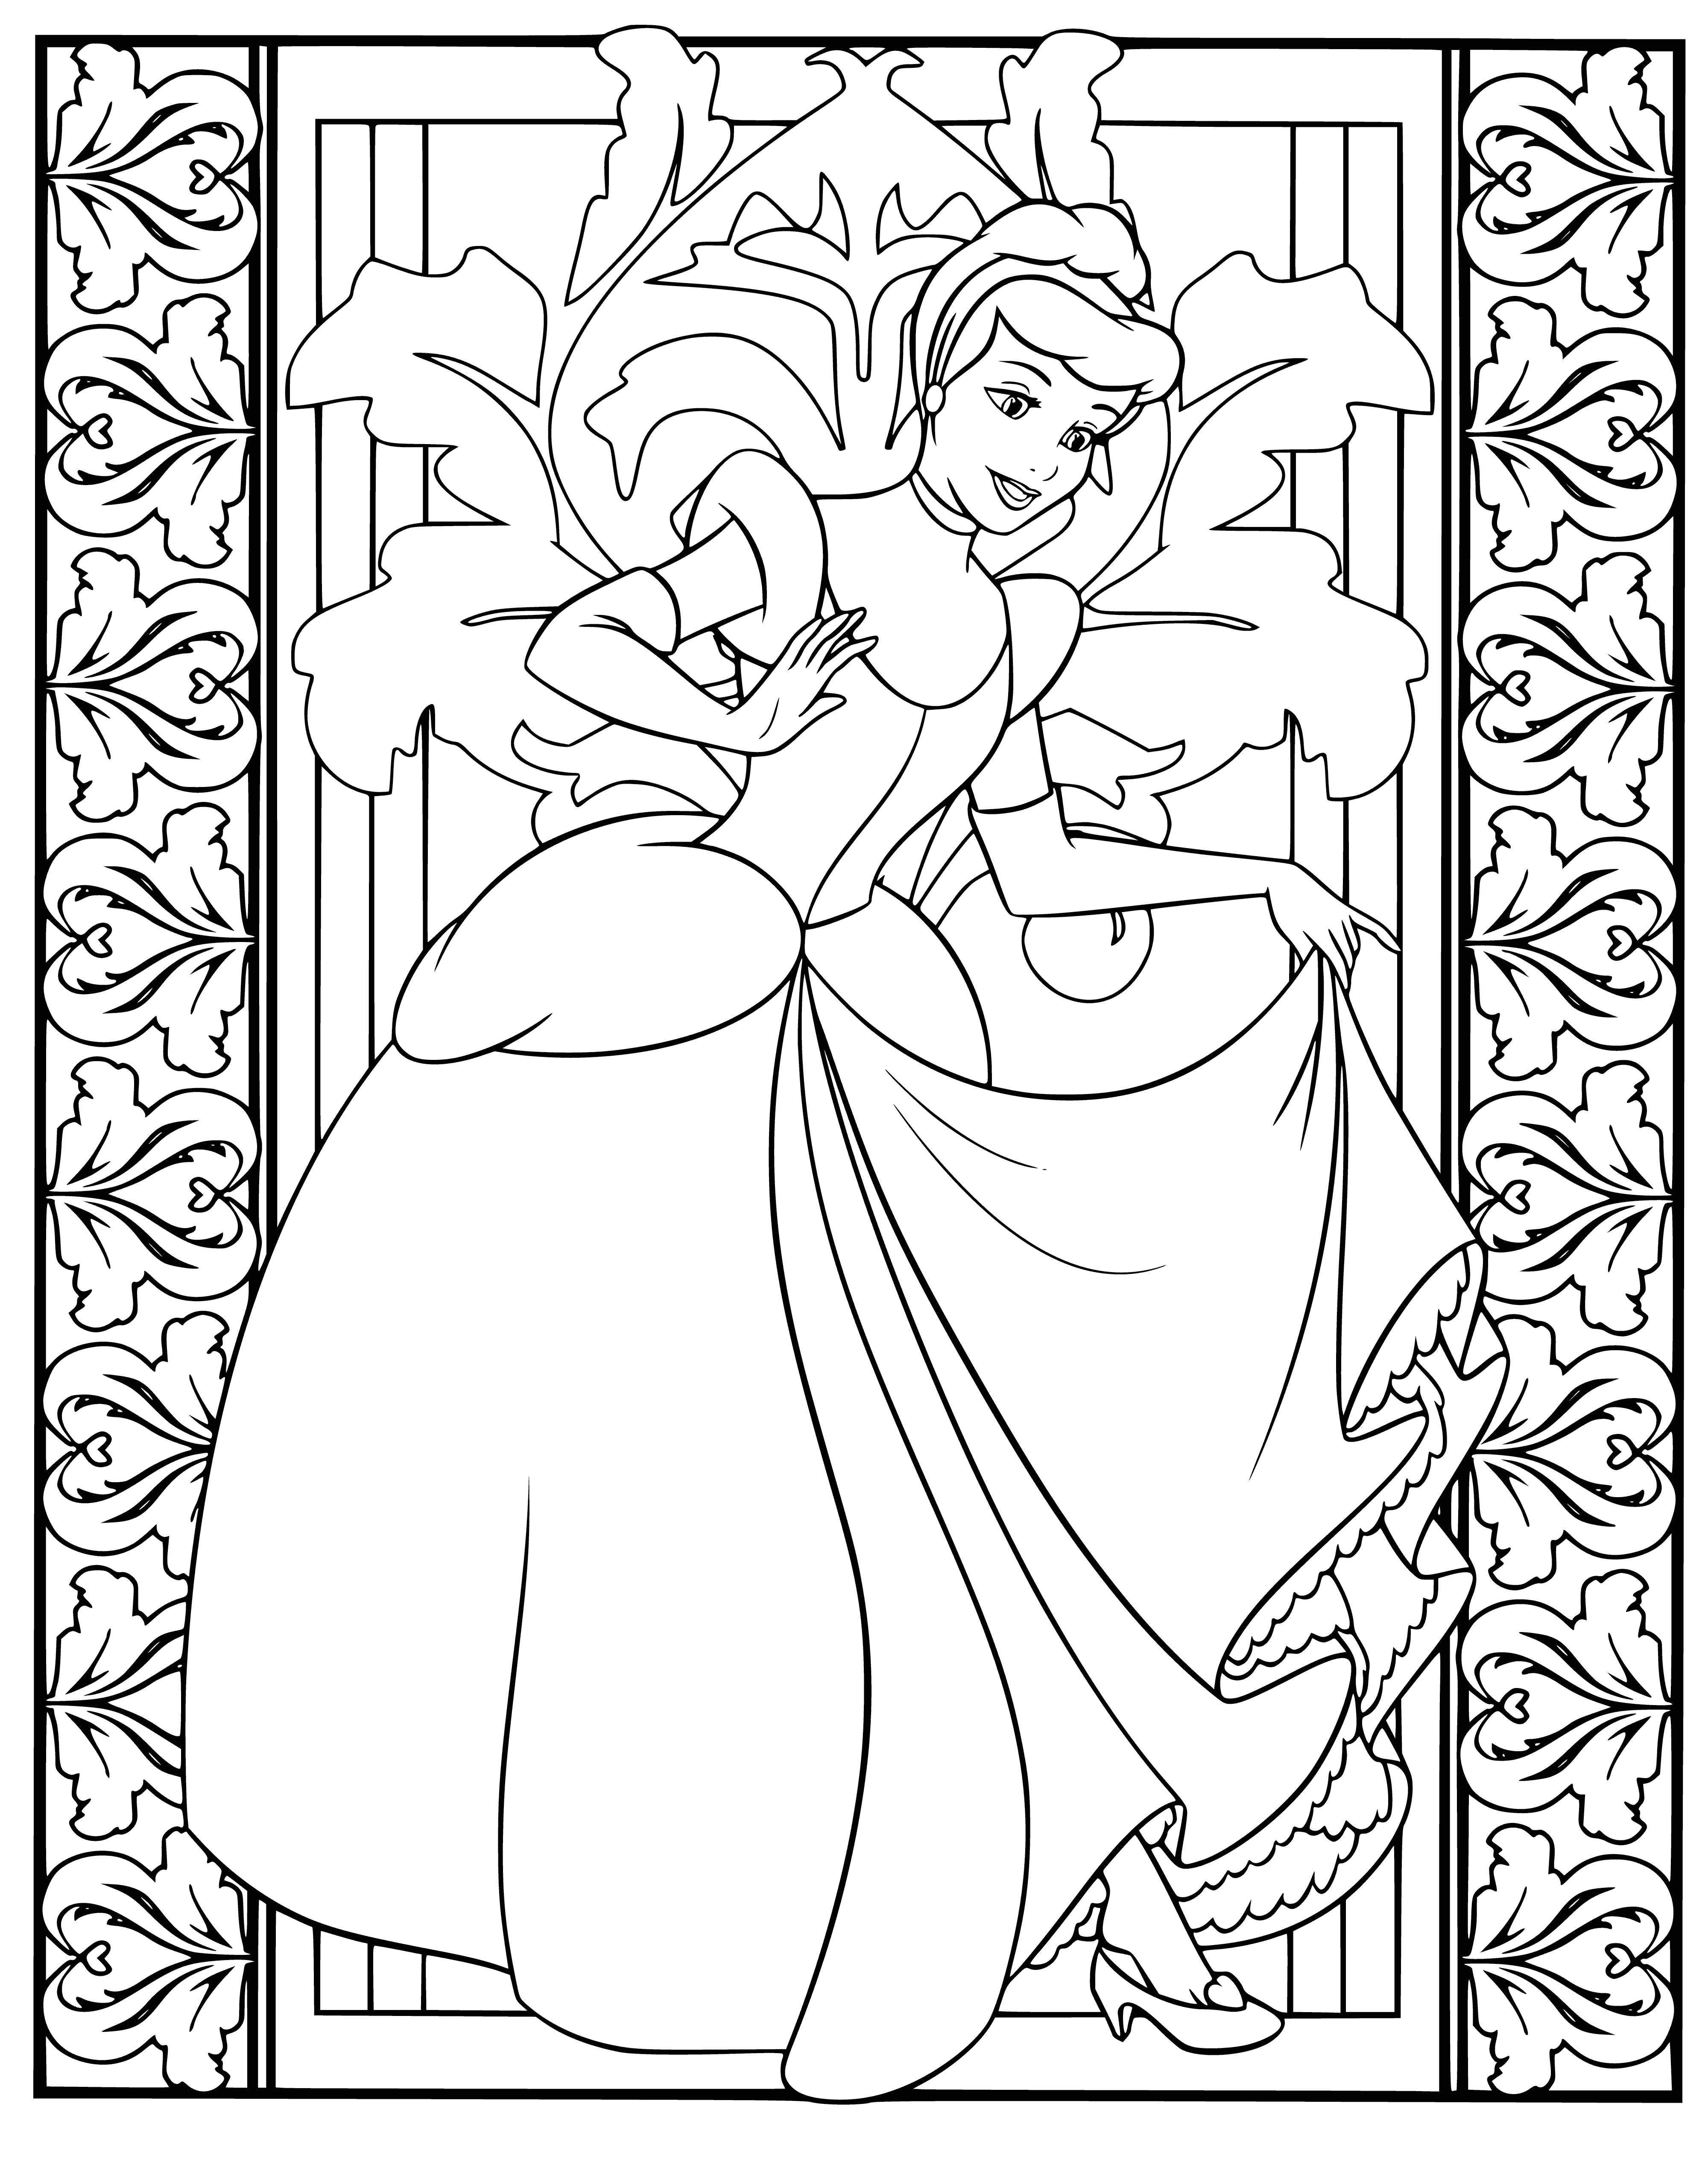 coloring page: Girl in blue dress smiles, looking at a castle. Soft curls frame her face.